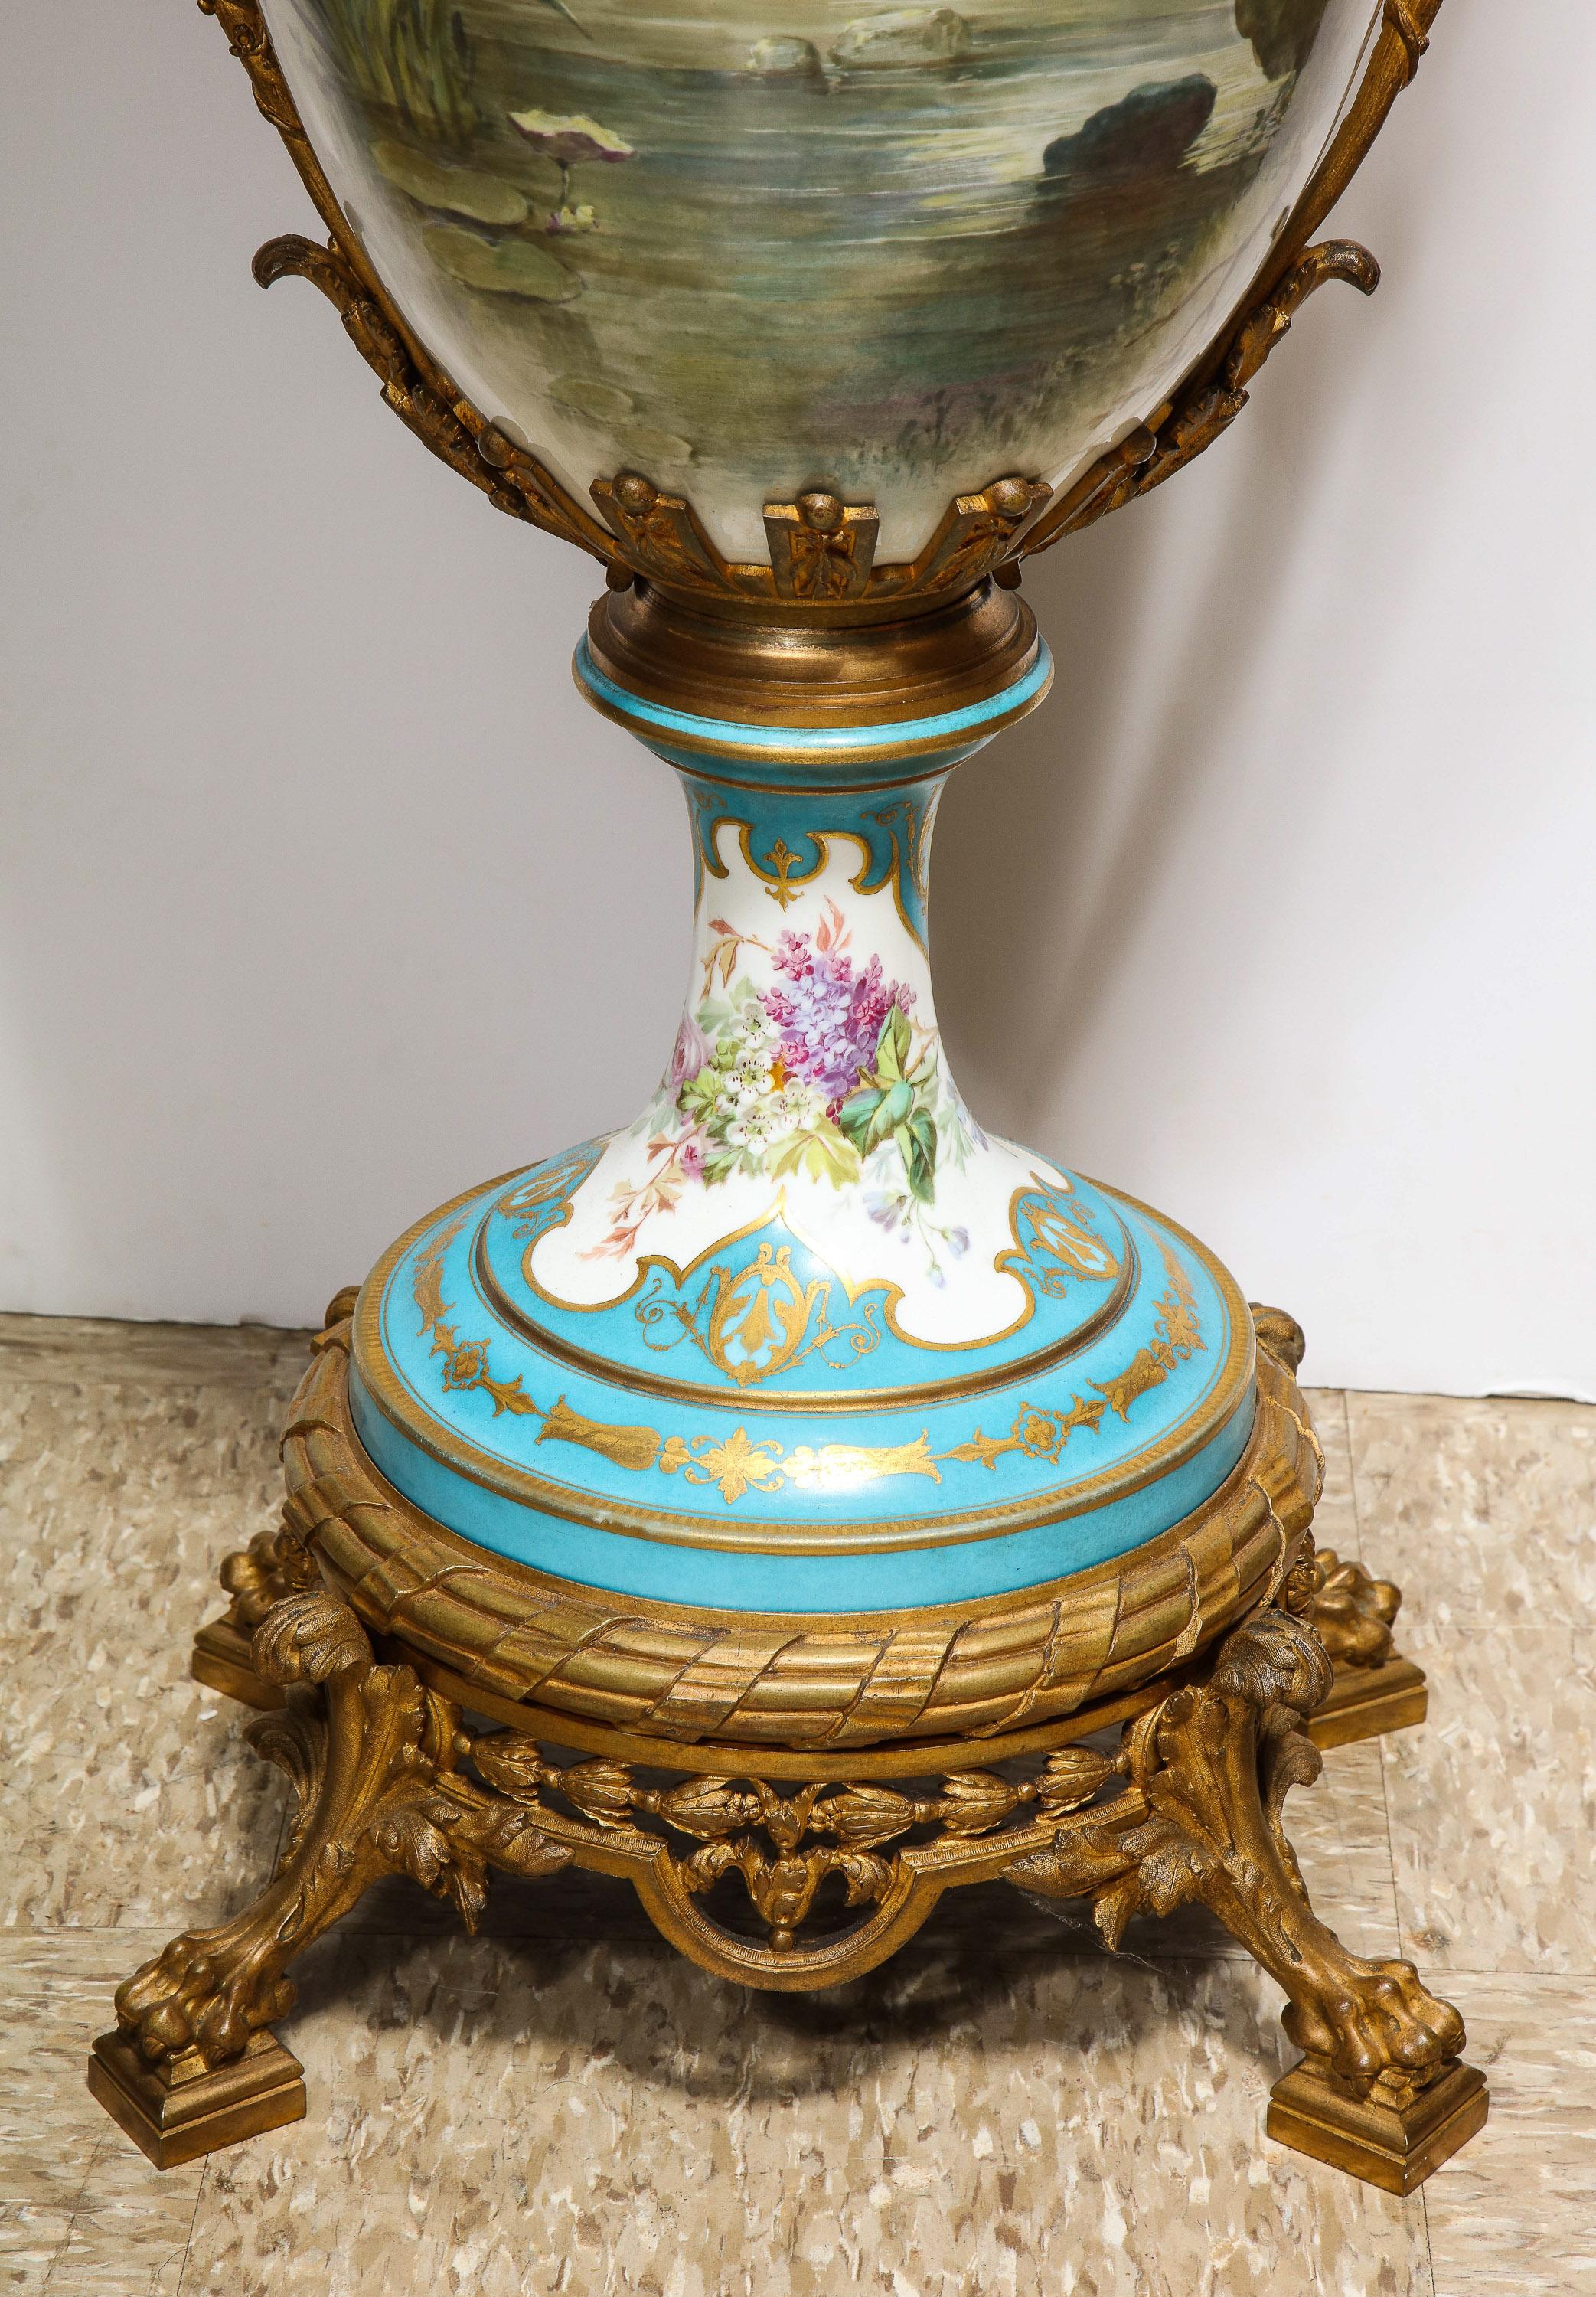 Palatial French Ormolu-Mounted Sevres Porcelain Hand-Painted Vase and Cover For Sale 10